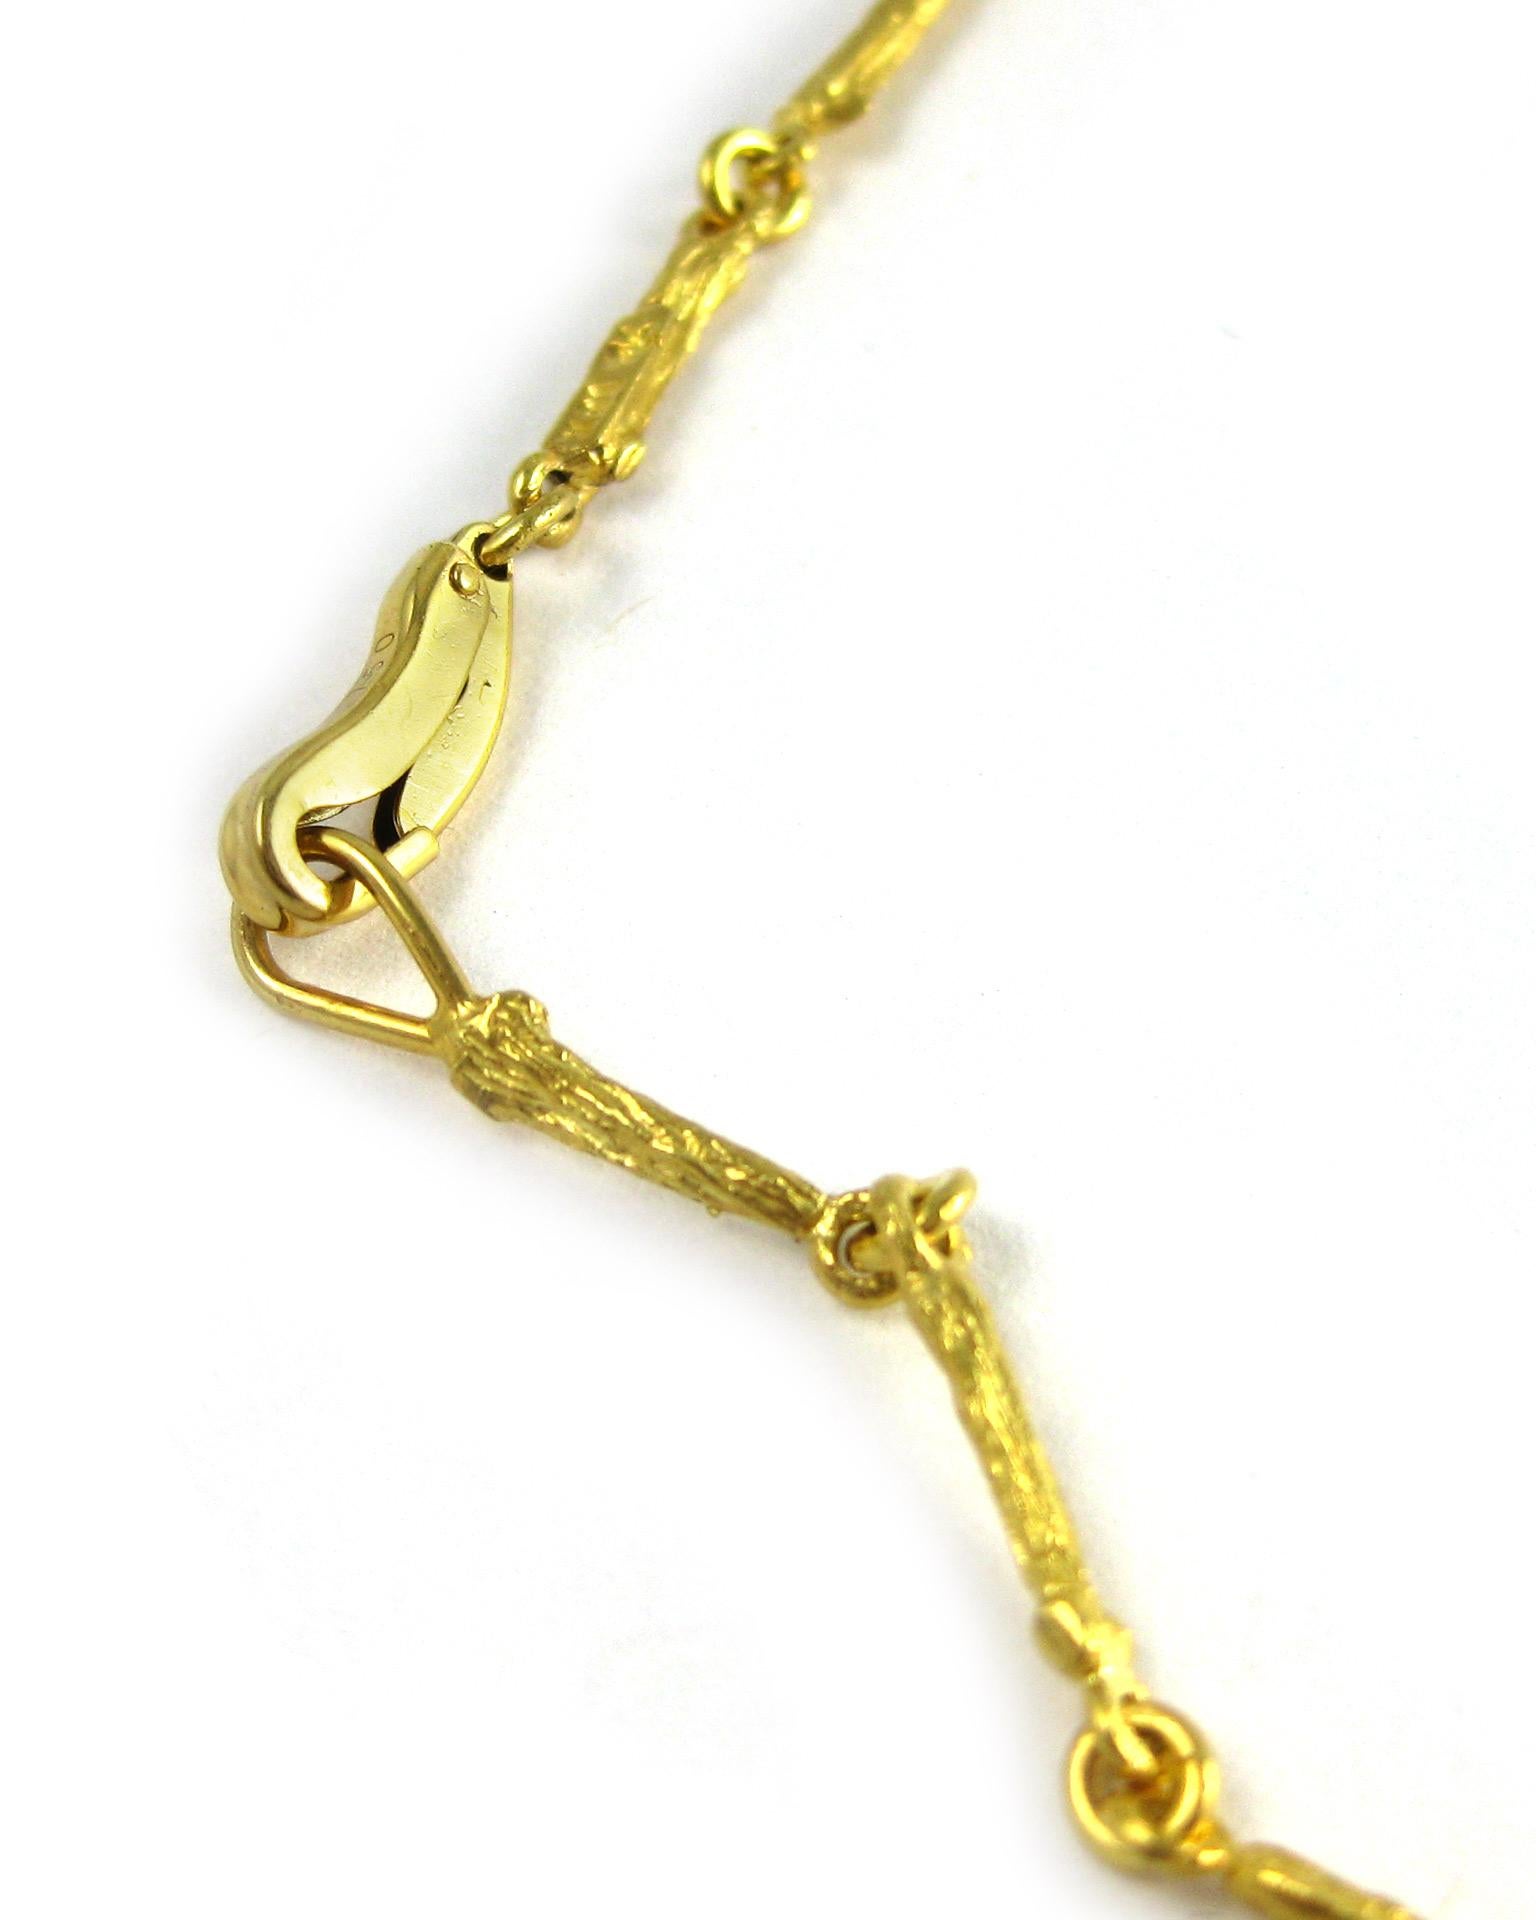 Channeling the eternal Tree of Life, the organic spirit of K. Brunini is captured through this twig short link necklace in 18k yellow gold.

In the Twig Collection, nature exists alongside elegant luxuries, but the lines blur: Rough textures of